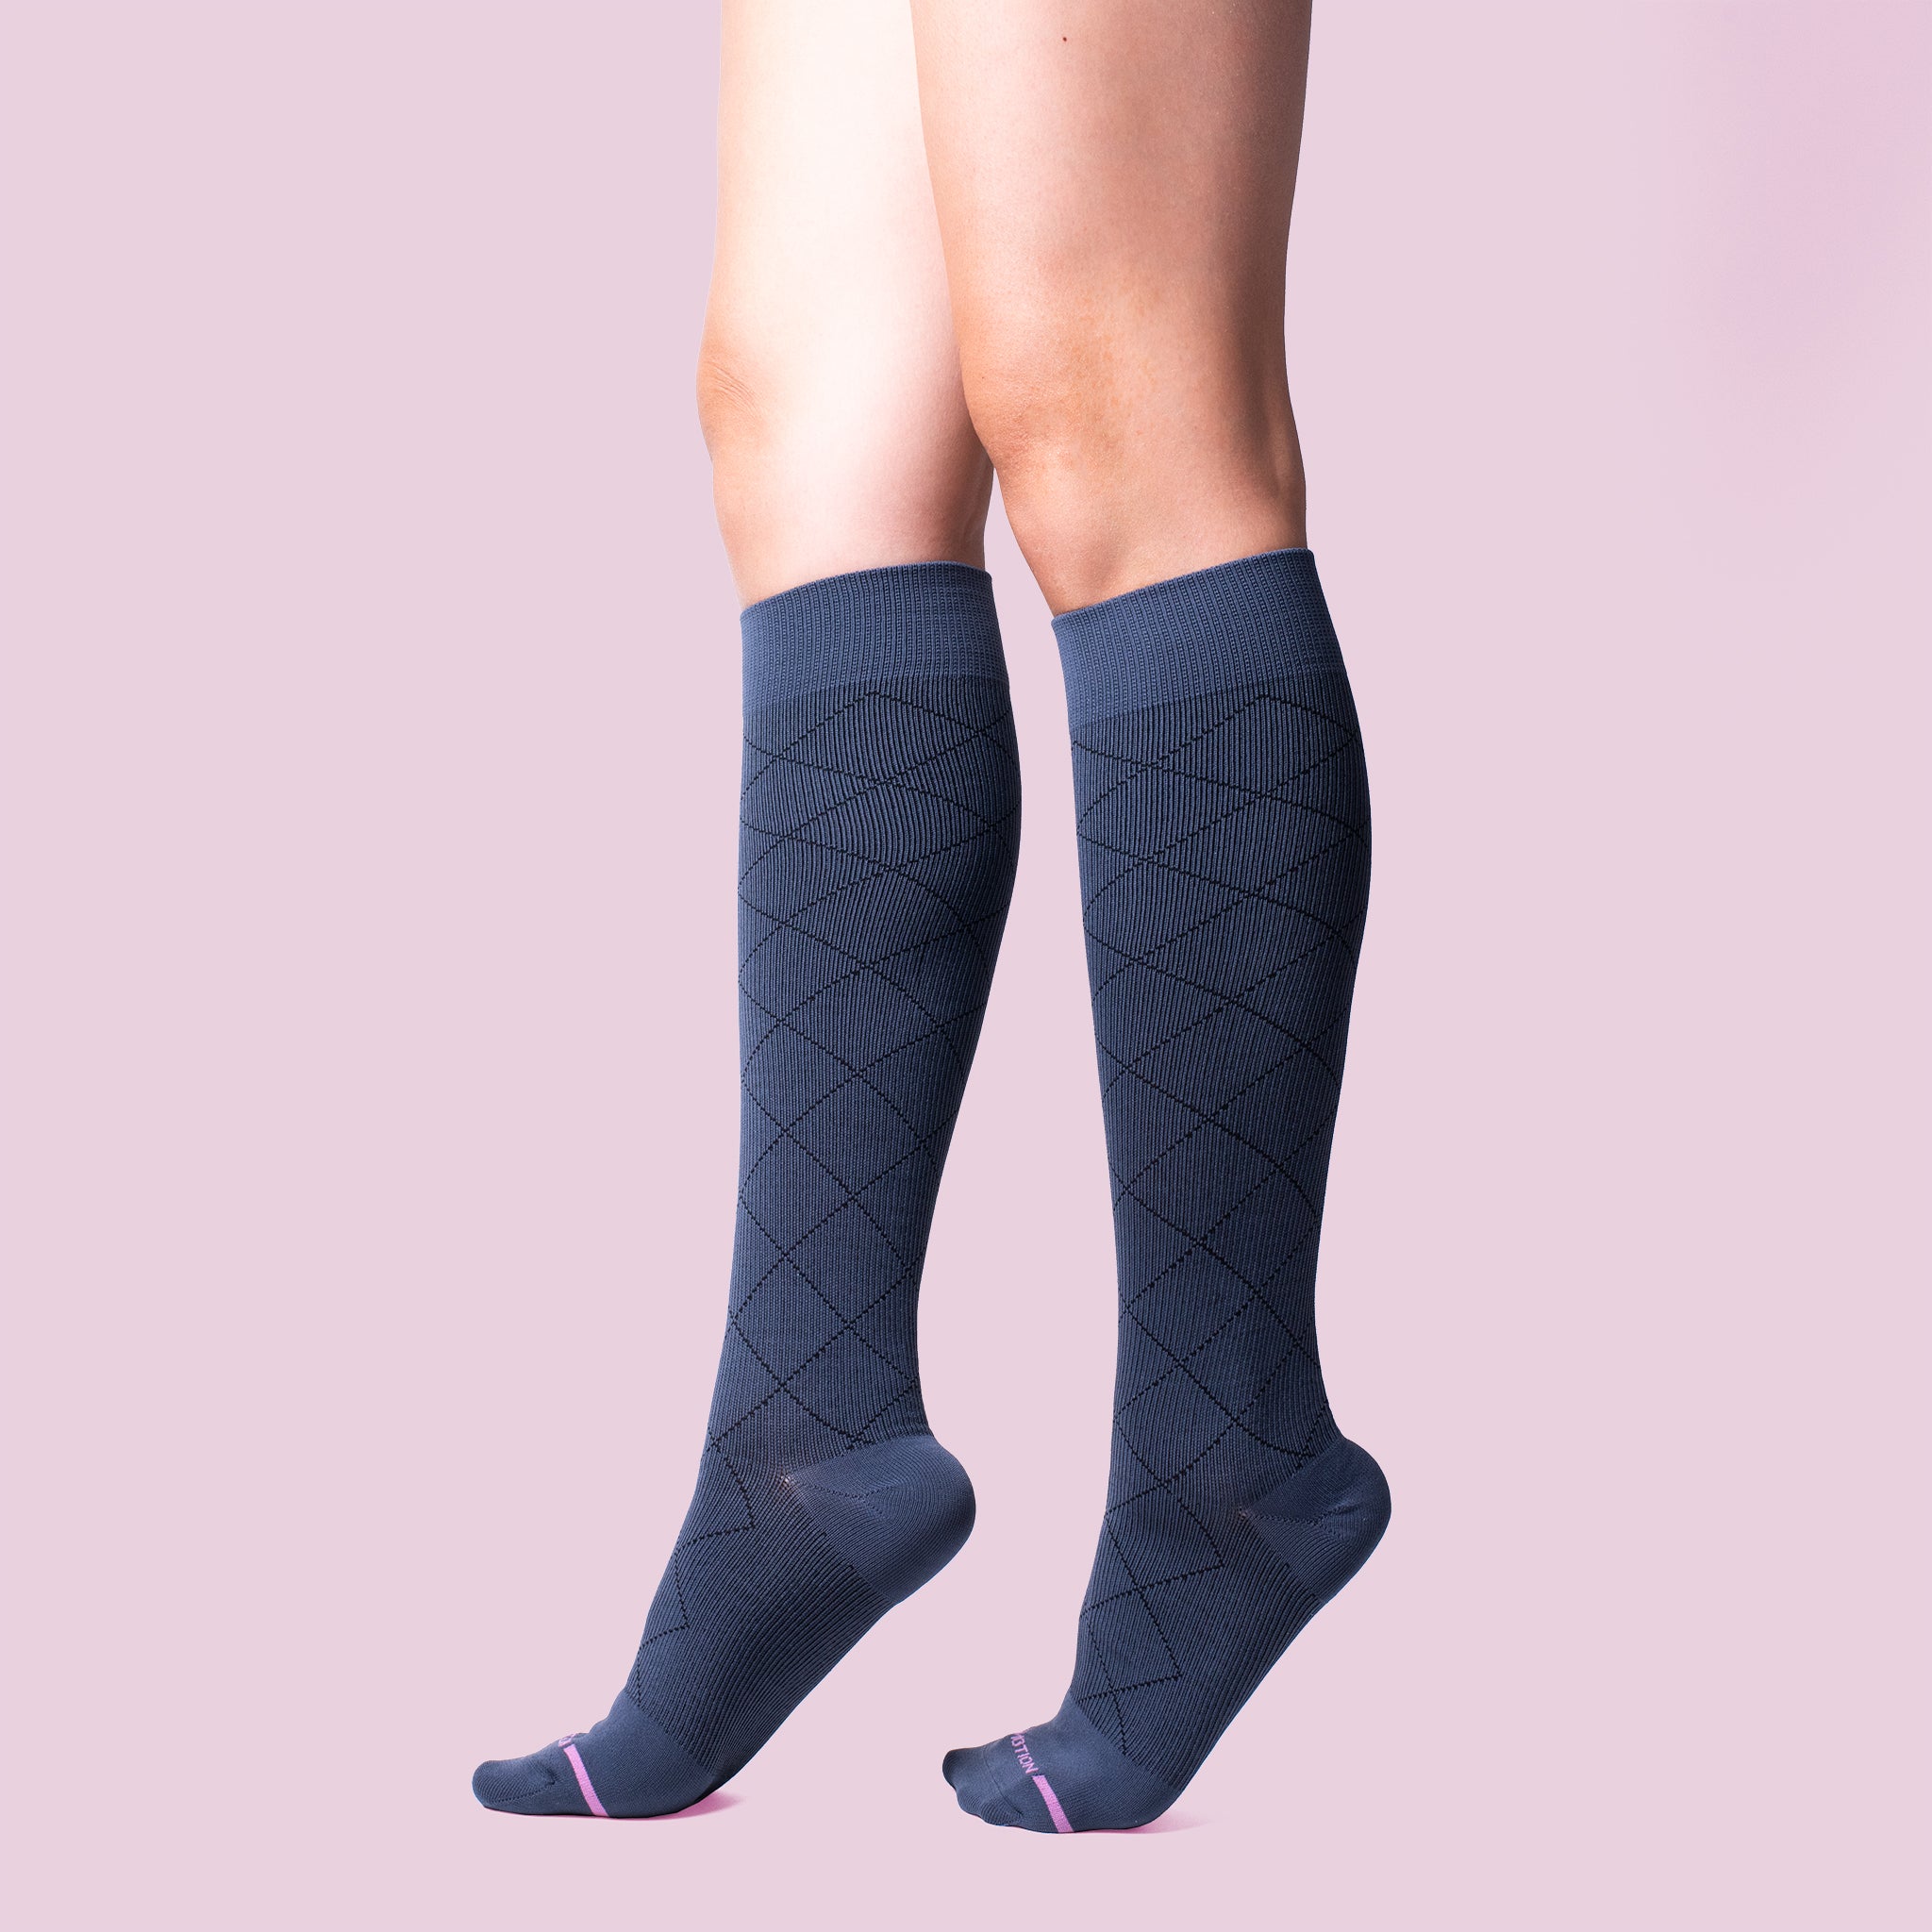 Miayilima Compression Socks for Women Women'S Fashion Casual Invisible Long  Lace Sexy Breathable Socks Compression Socks Blue One Size 